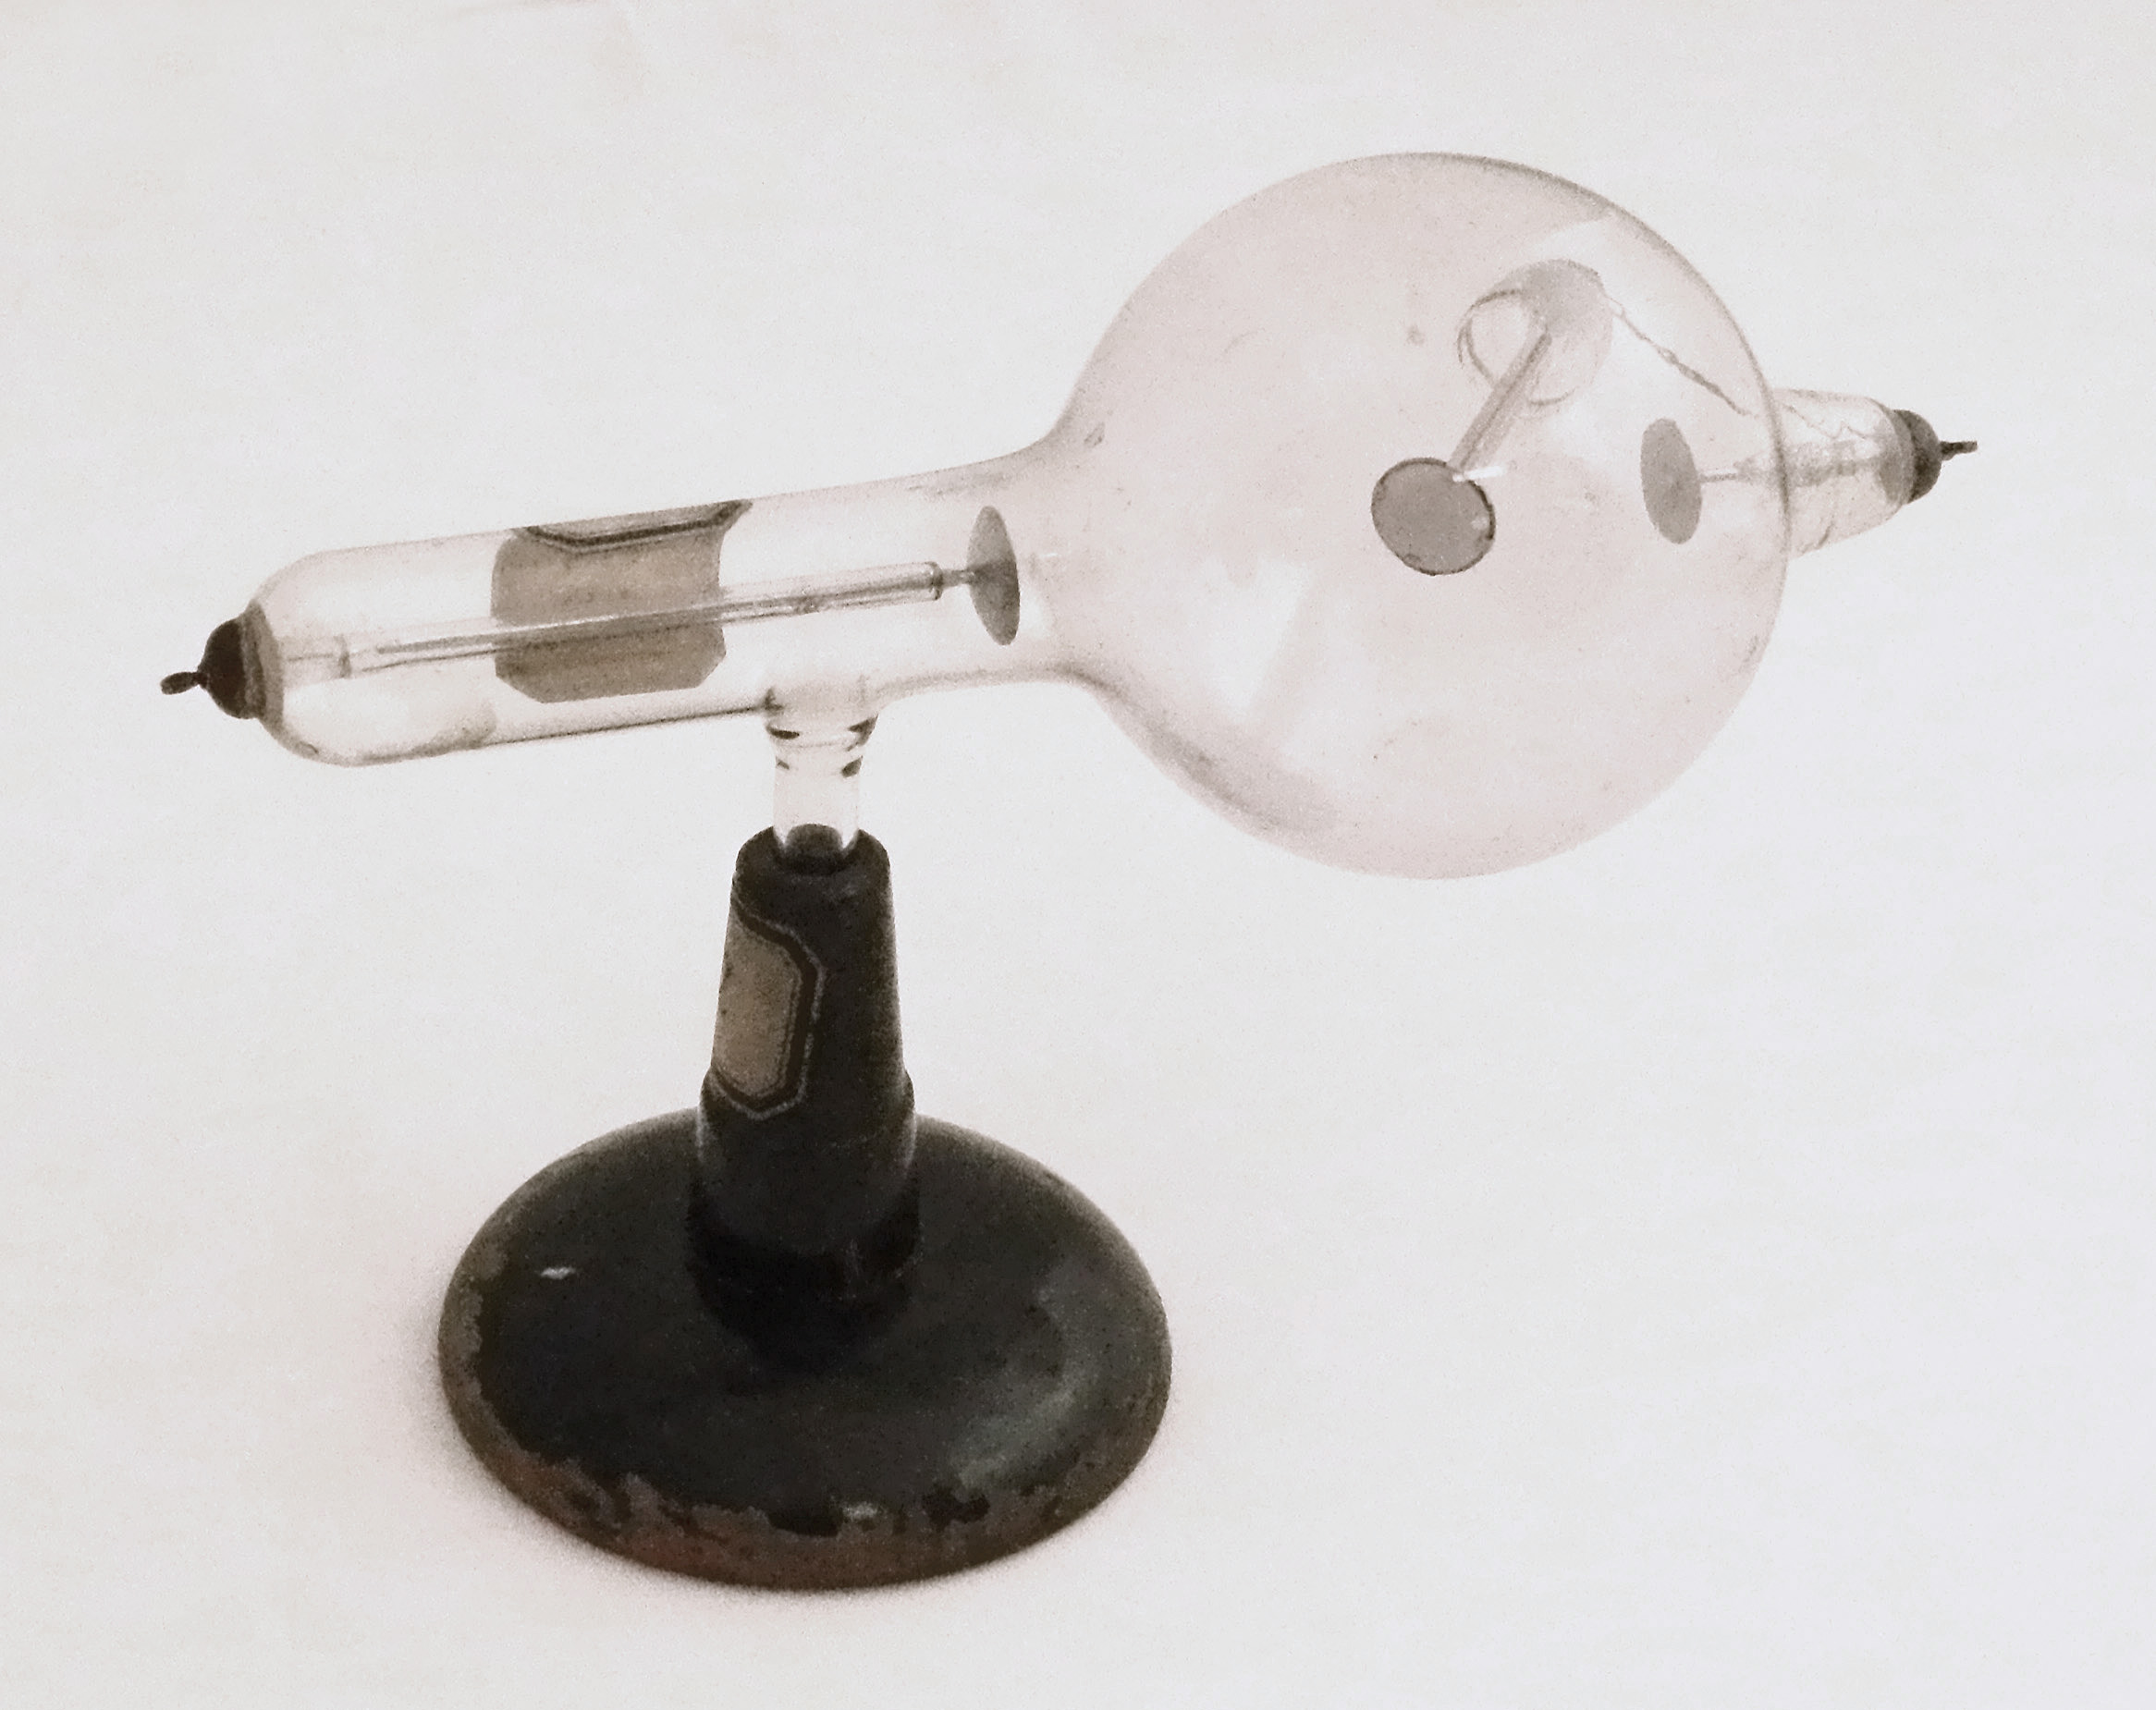 Simple Cold Cathode X-Ray Tube (1900-1905)